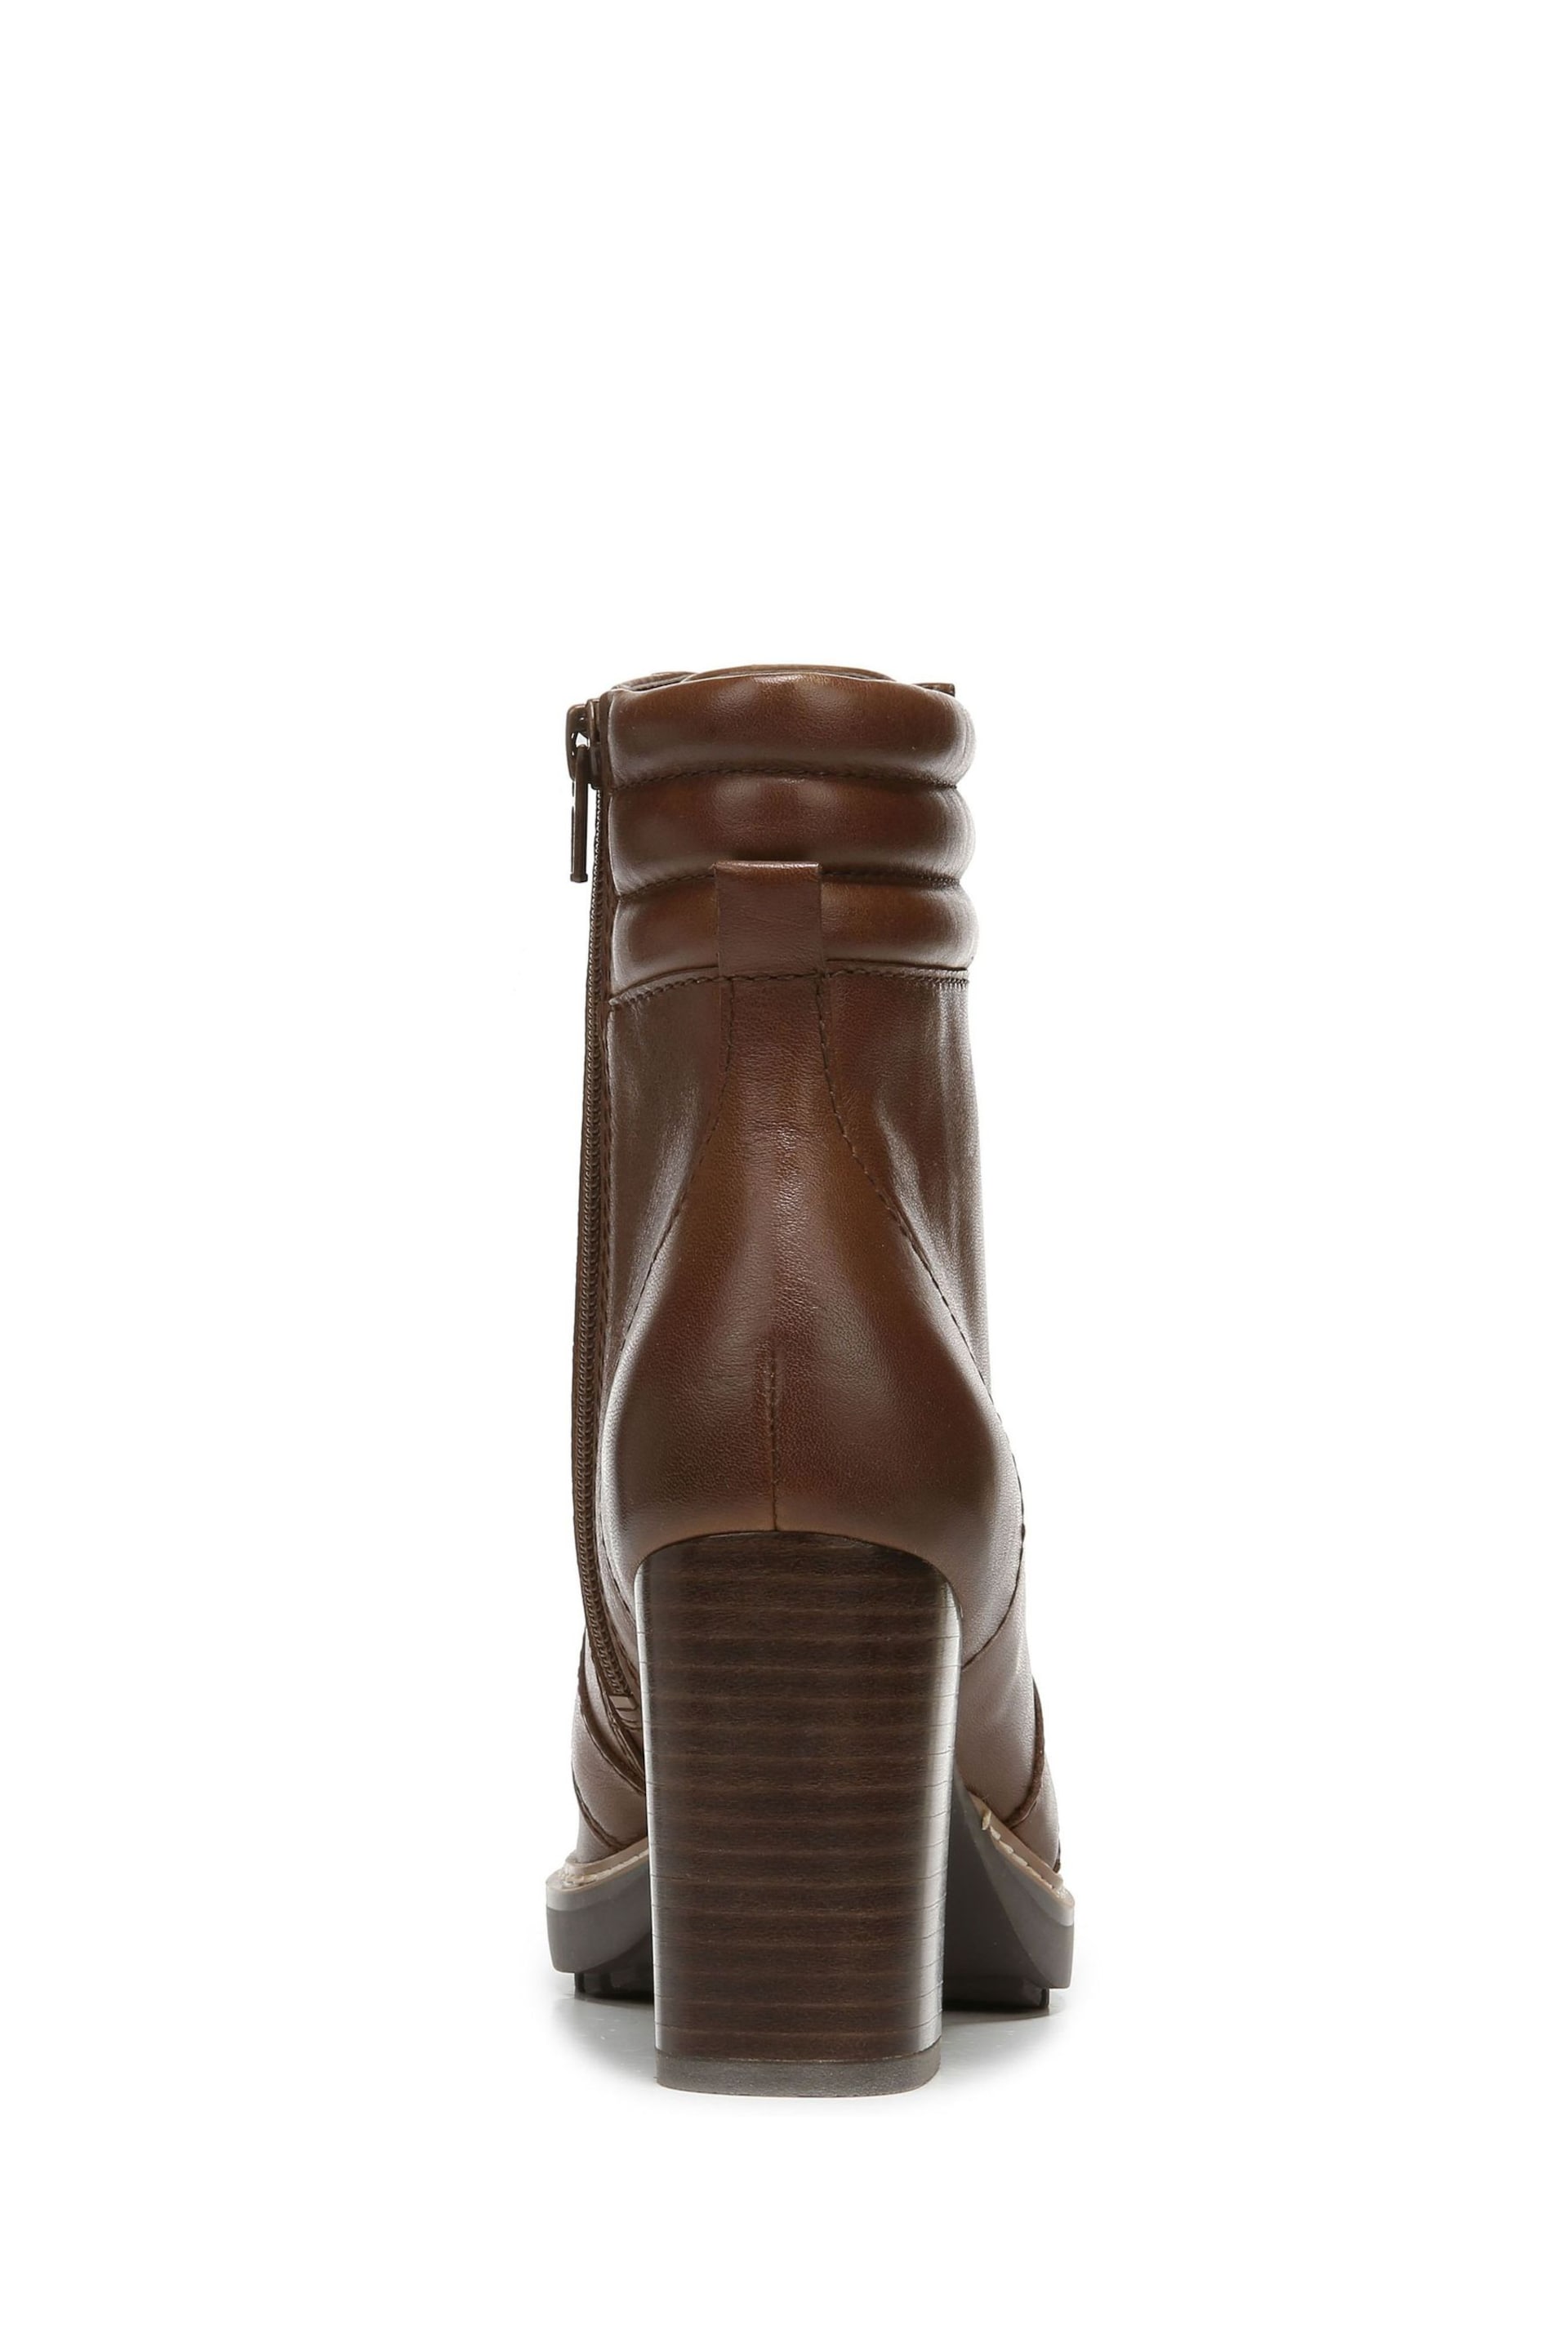 Naturalizer Callie Ankle Leather Boots - Image 5 of 7